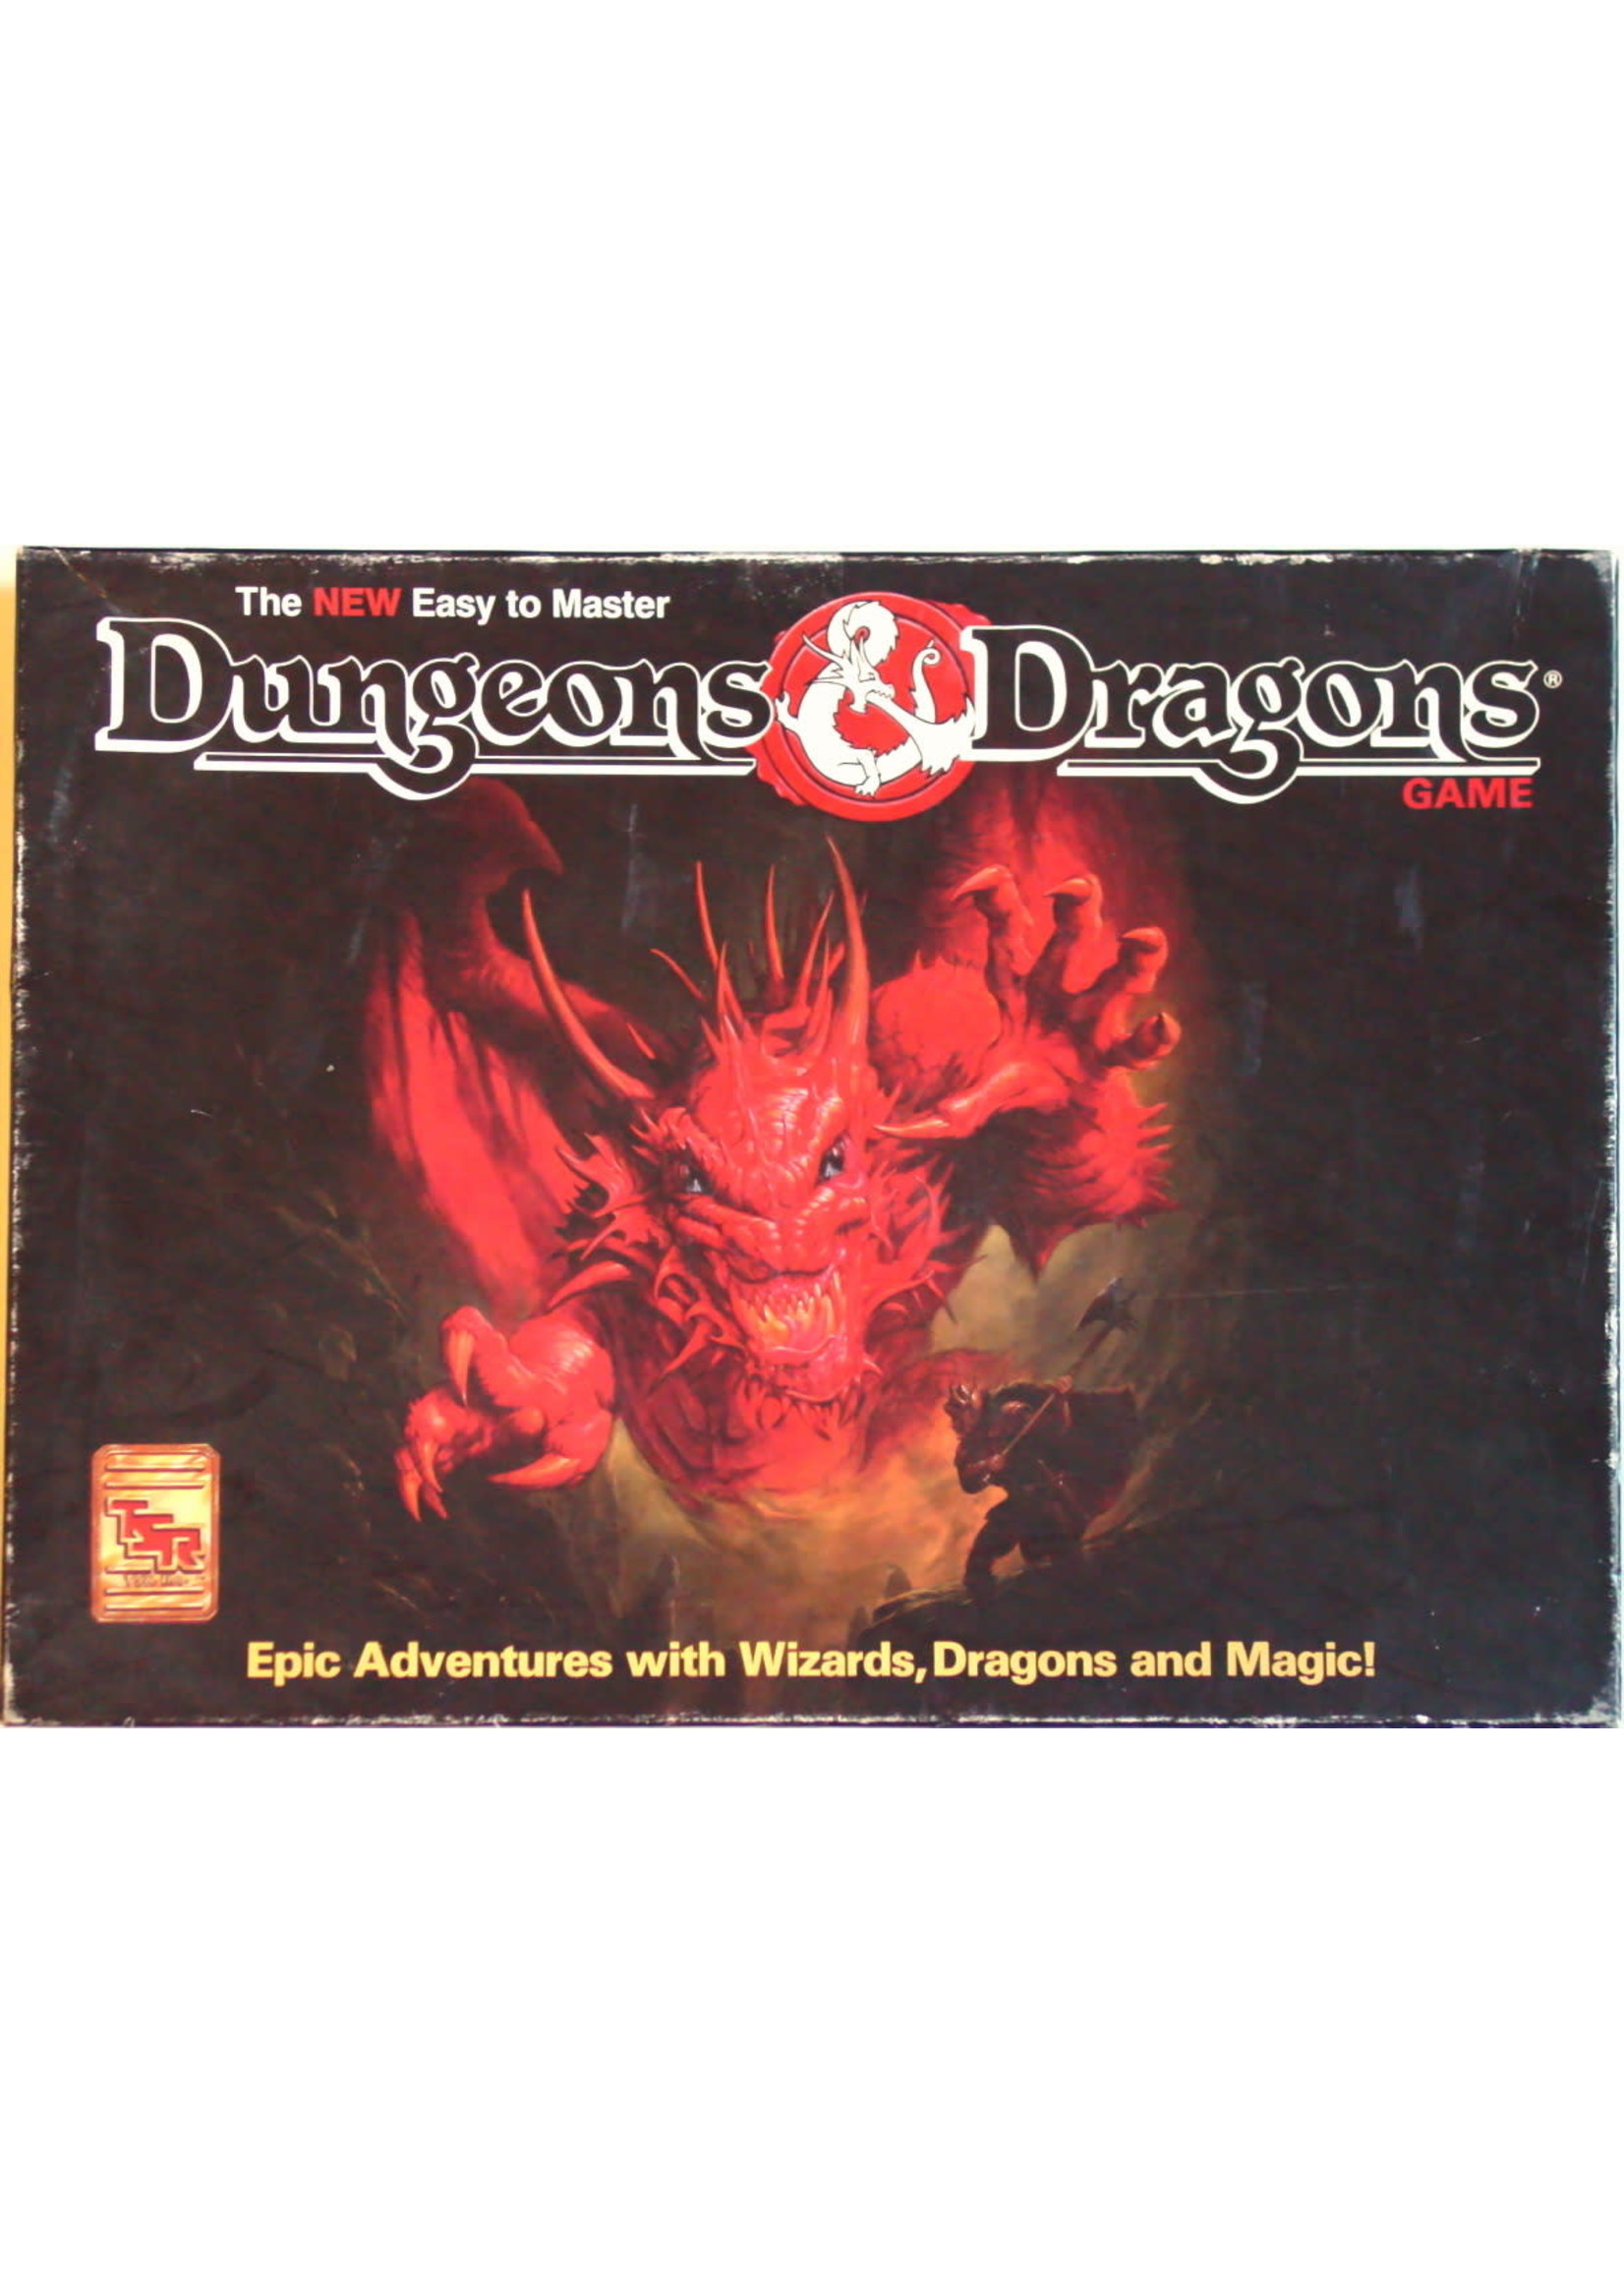 Rental RENTAL - Dungeons & Dragons Game (The New And Easy to Master) 2lbs 3oz